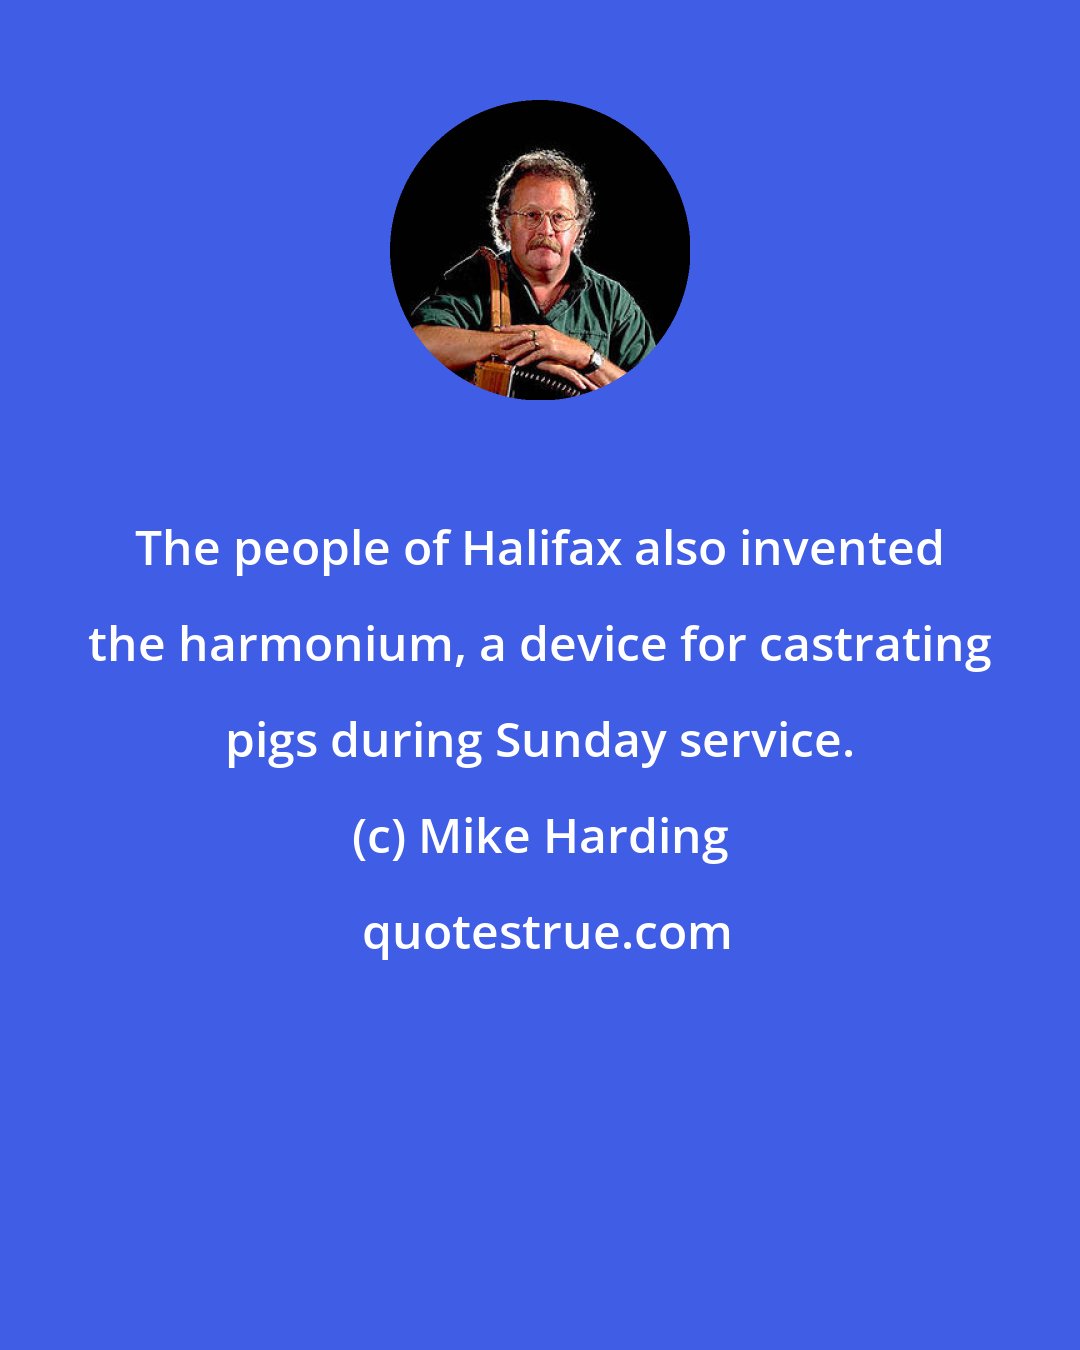 Mike Harding: The people of Halifax also invented the harmonium, a device for castrating pigs during Sunday service.